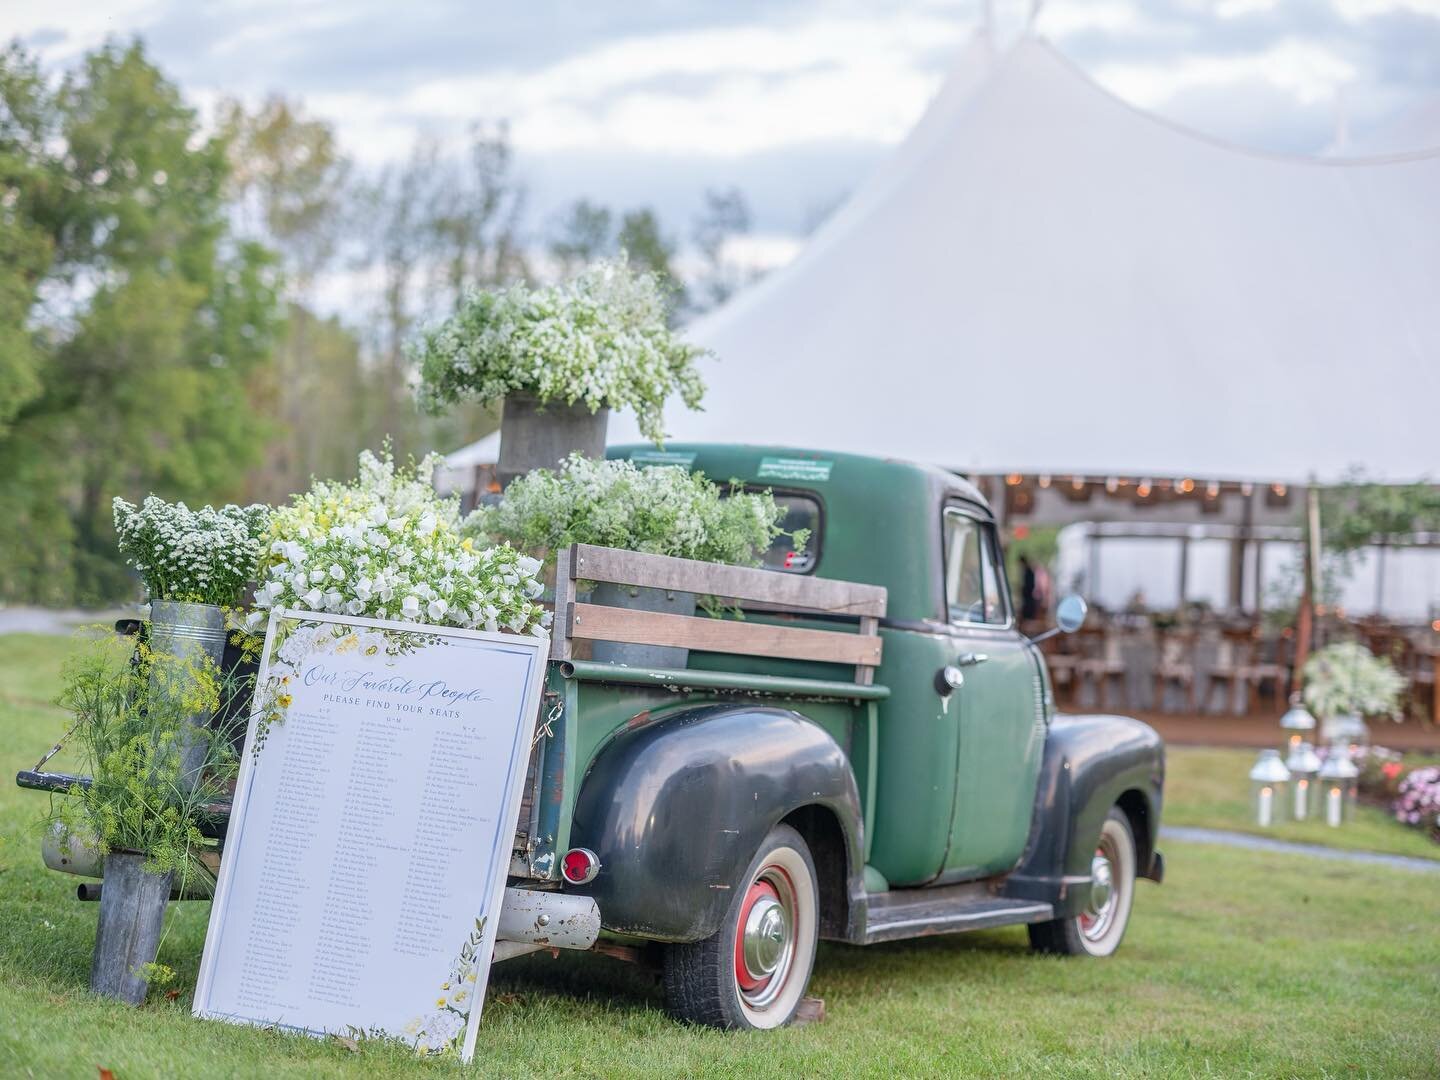 Lindsey borrowed her Uncle&rsquo;s vintage truck to welcome guests to the Reception tent, complete with a custom bumper sticker. More to come! 
Photo: @rodeoandcophoto 

@oneforthebooksevents 
@rainorshinetentco 

#manchestervtwedding #vermontwedding